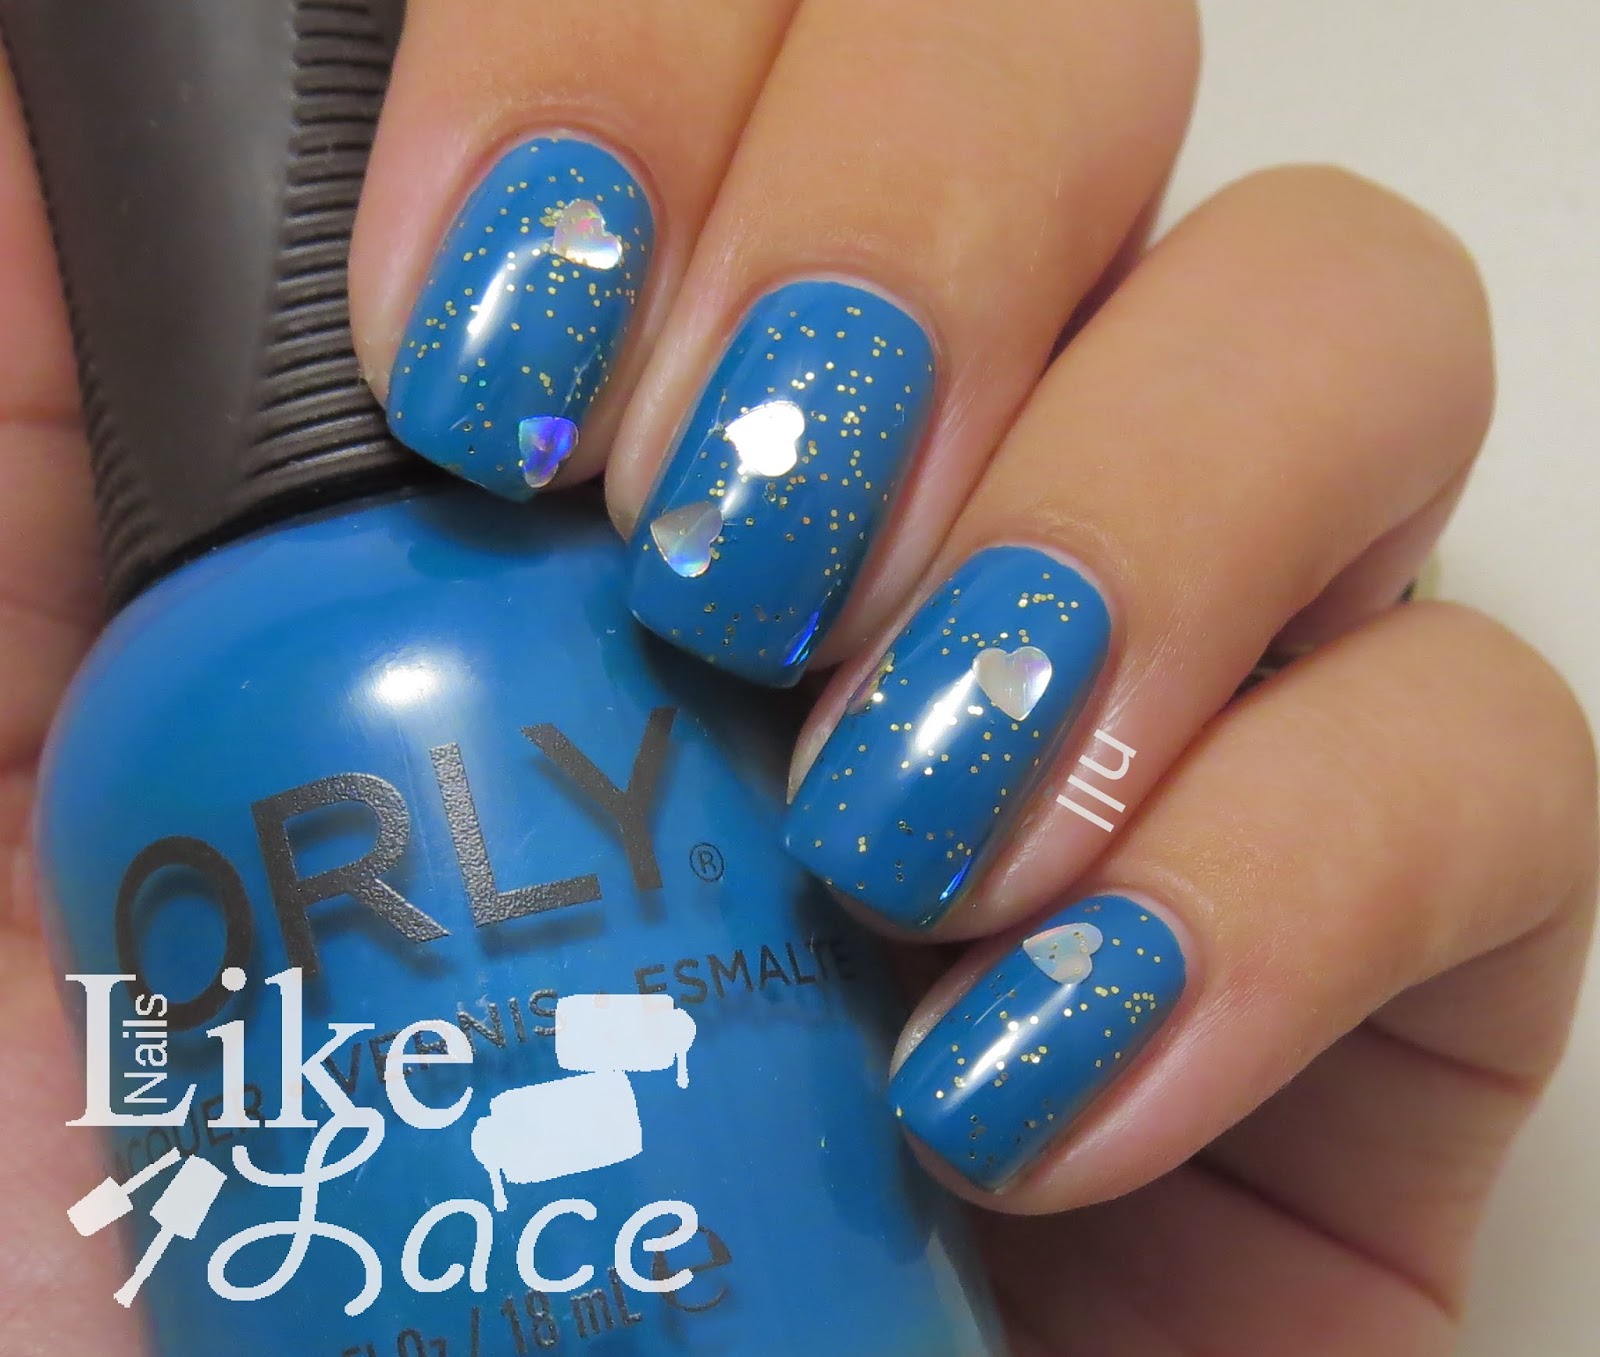 NailsLikeLace: Twinsie Tuesday - Teal Nails for Ovarian Cancer Awareness